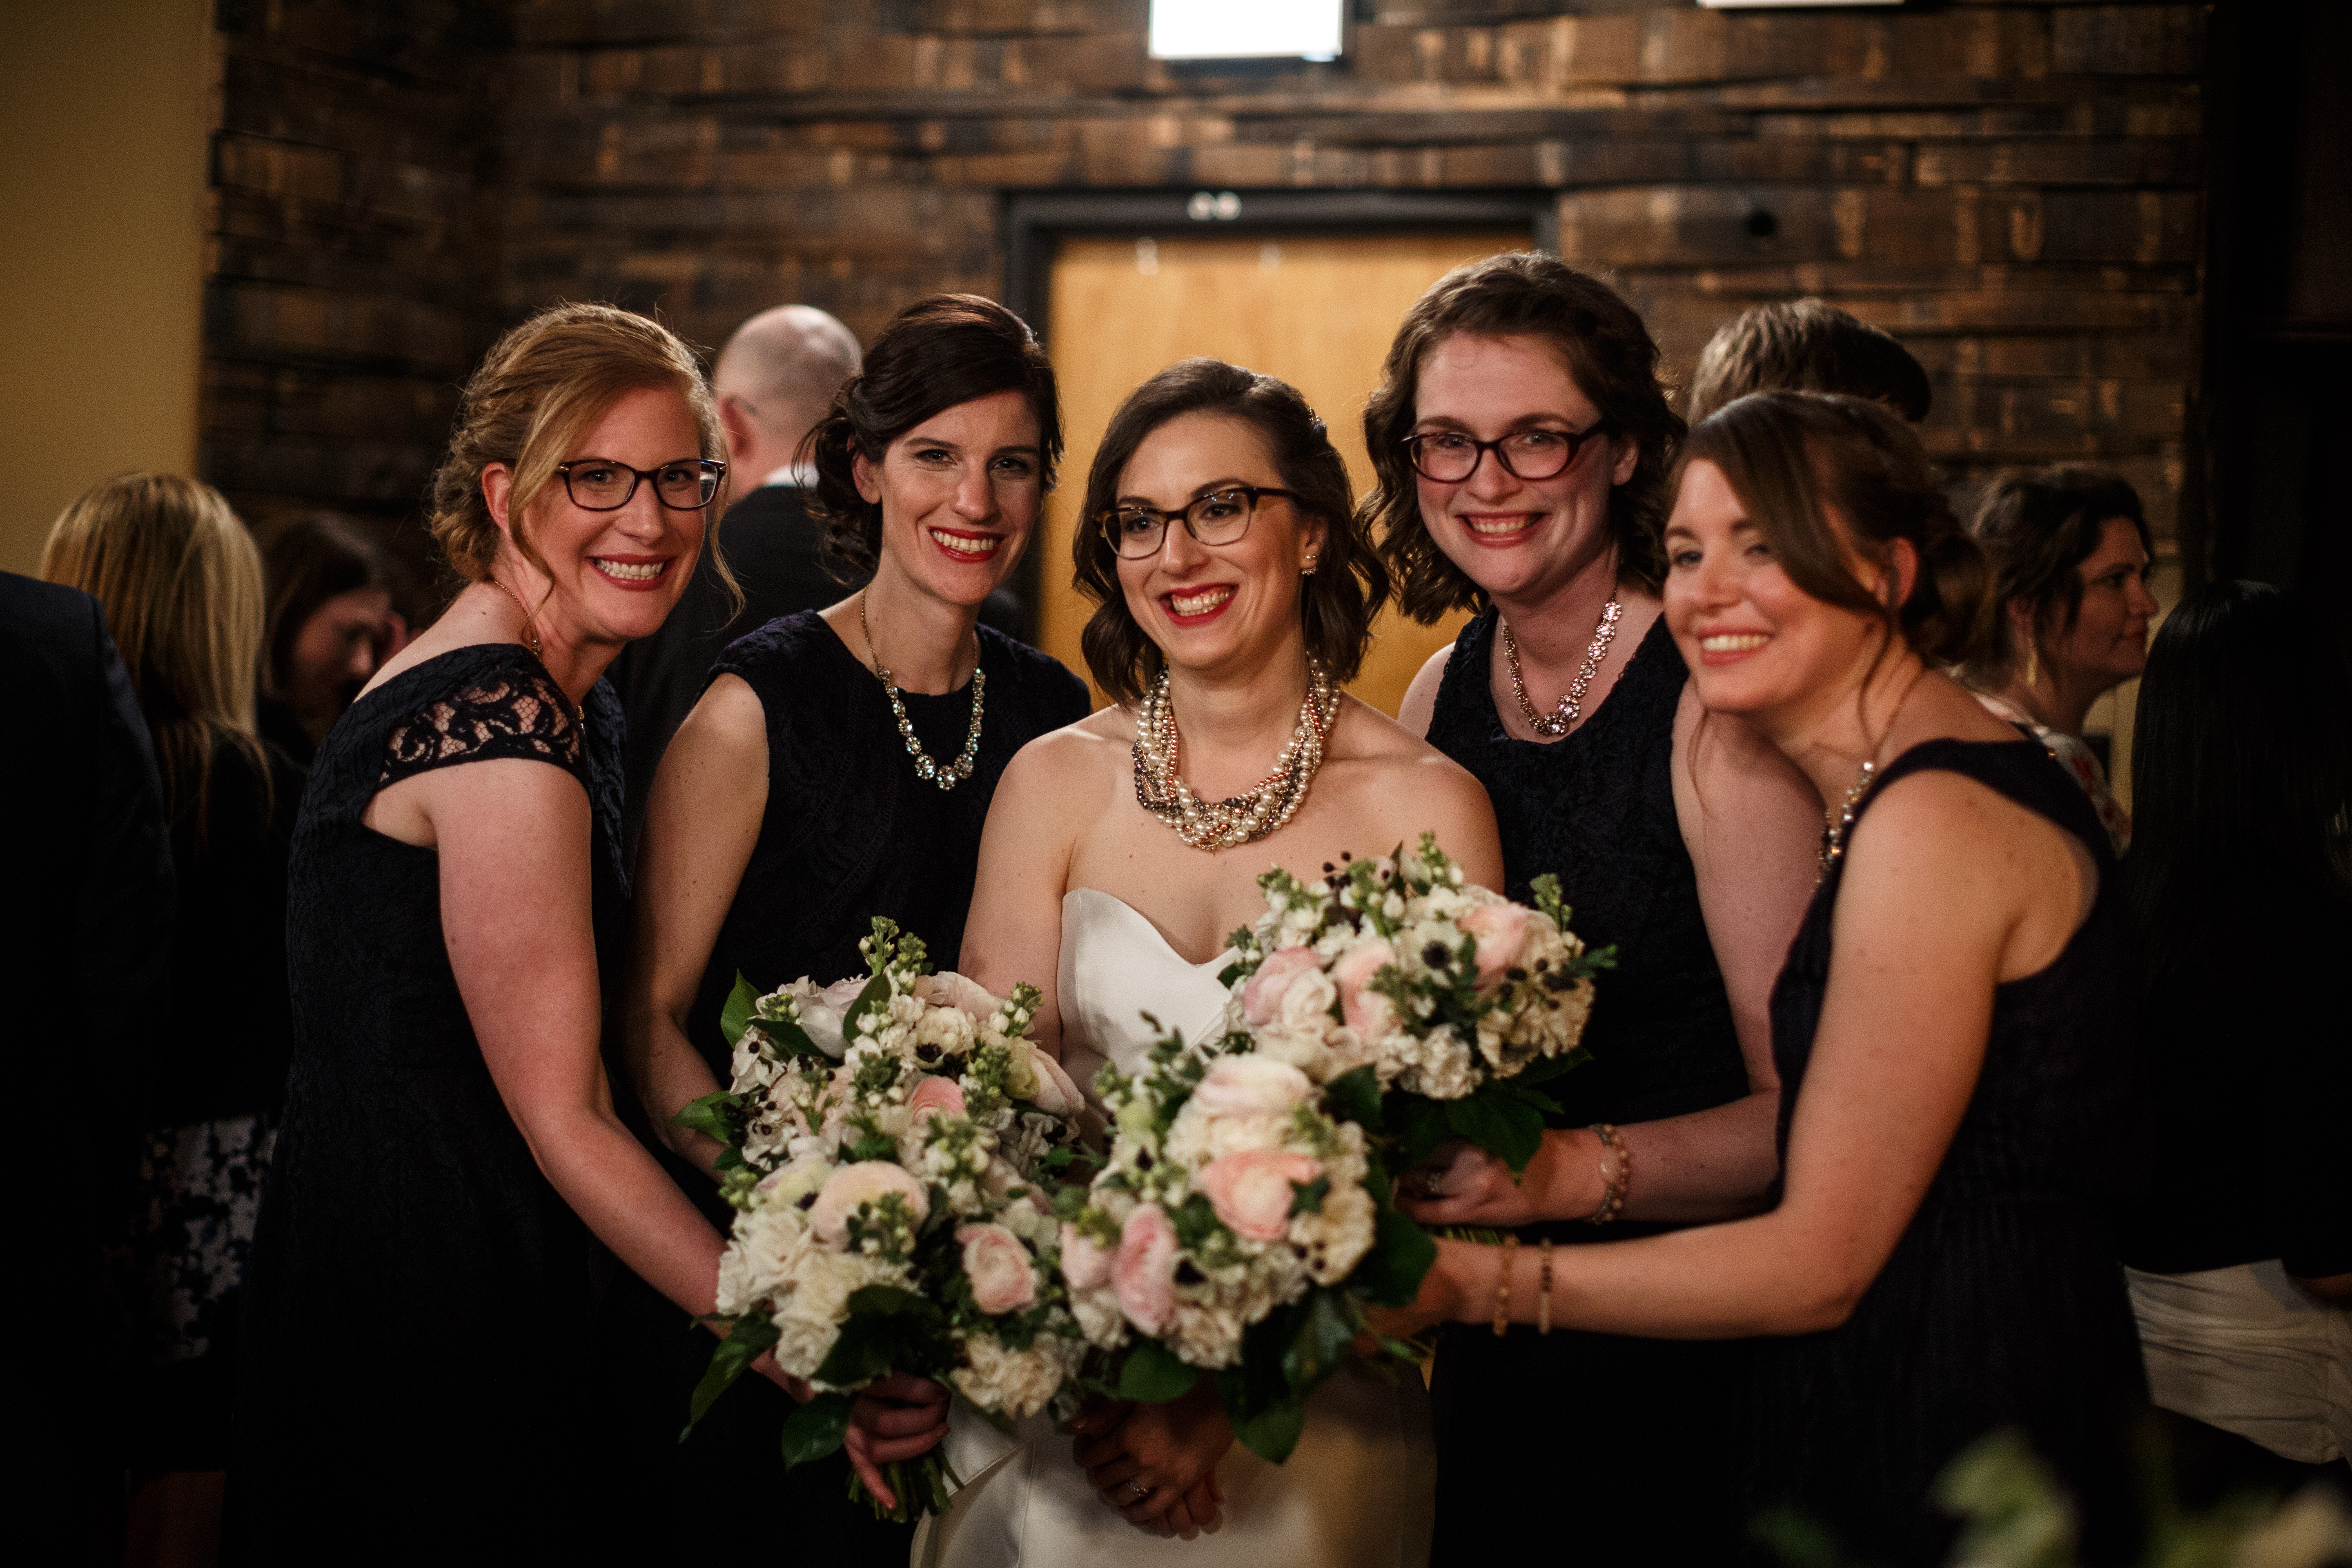 Spring bride and bridesmaids at Revolution Brewing Chicago with pink and white bouquets of ranunculus, roses, and anemones.